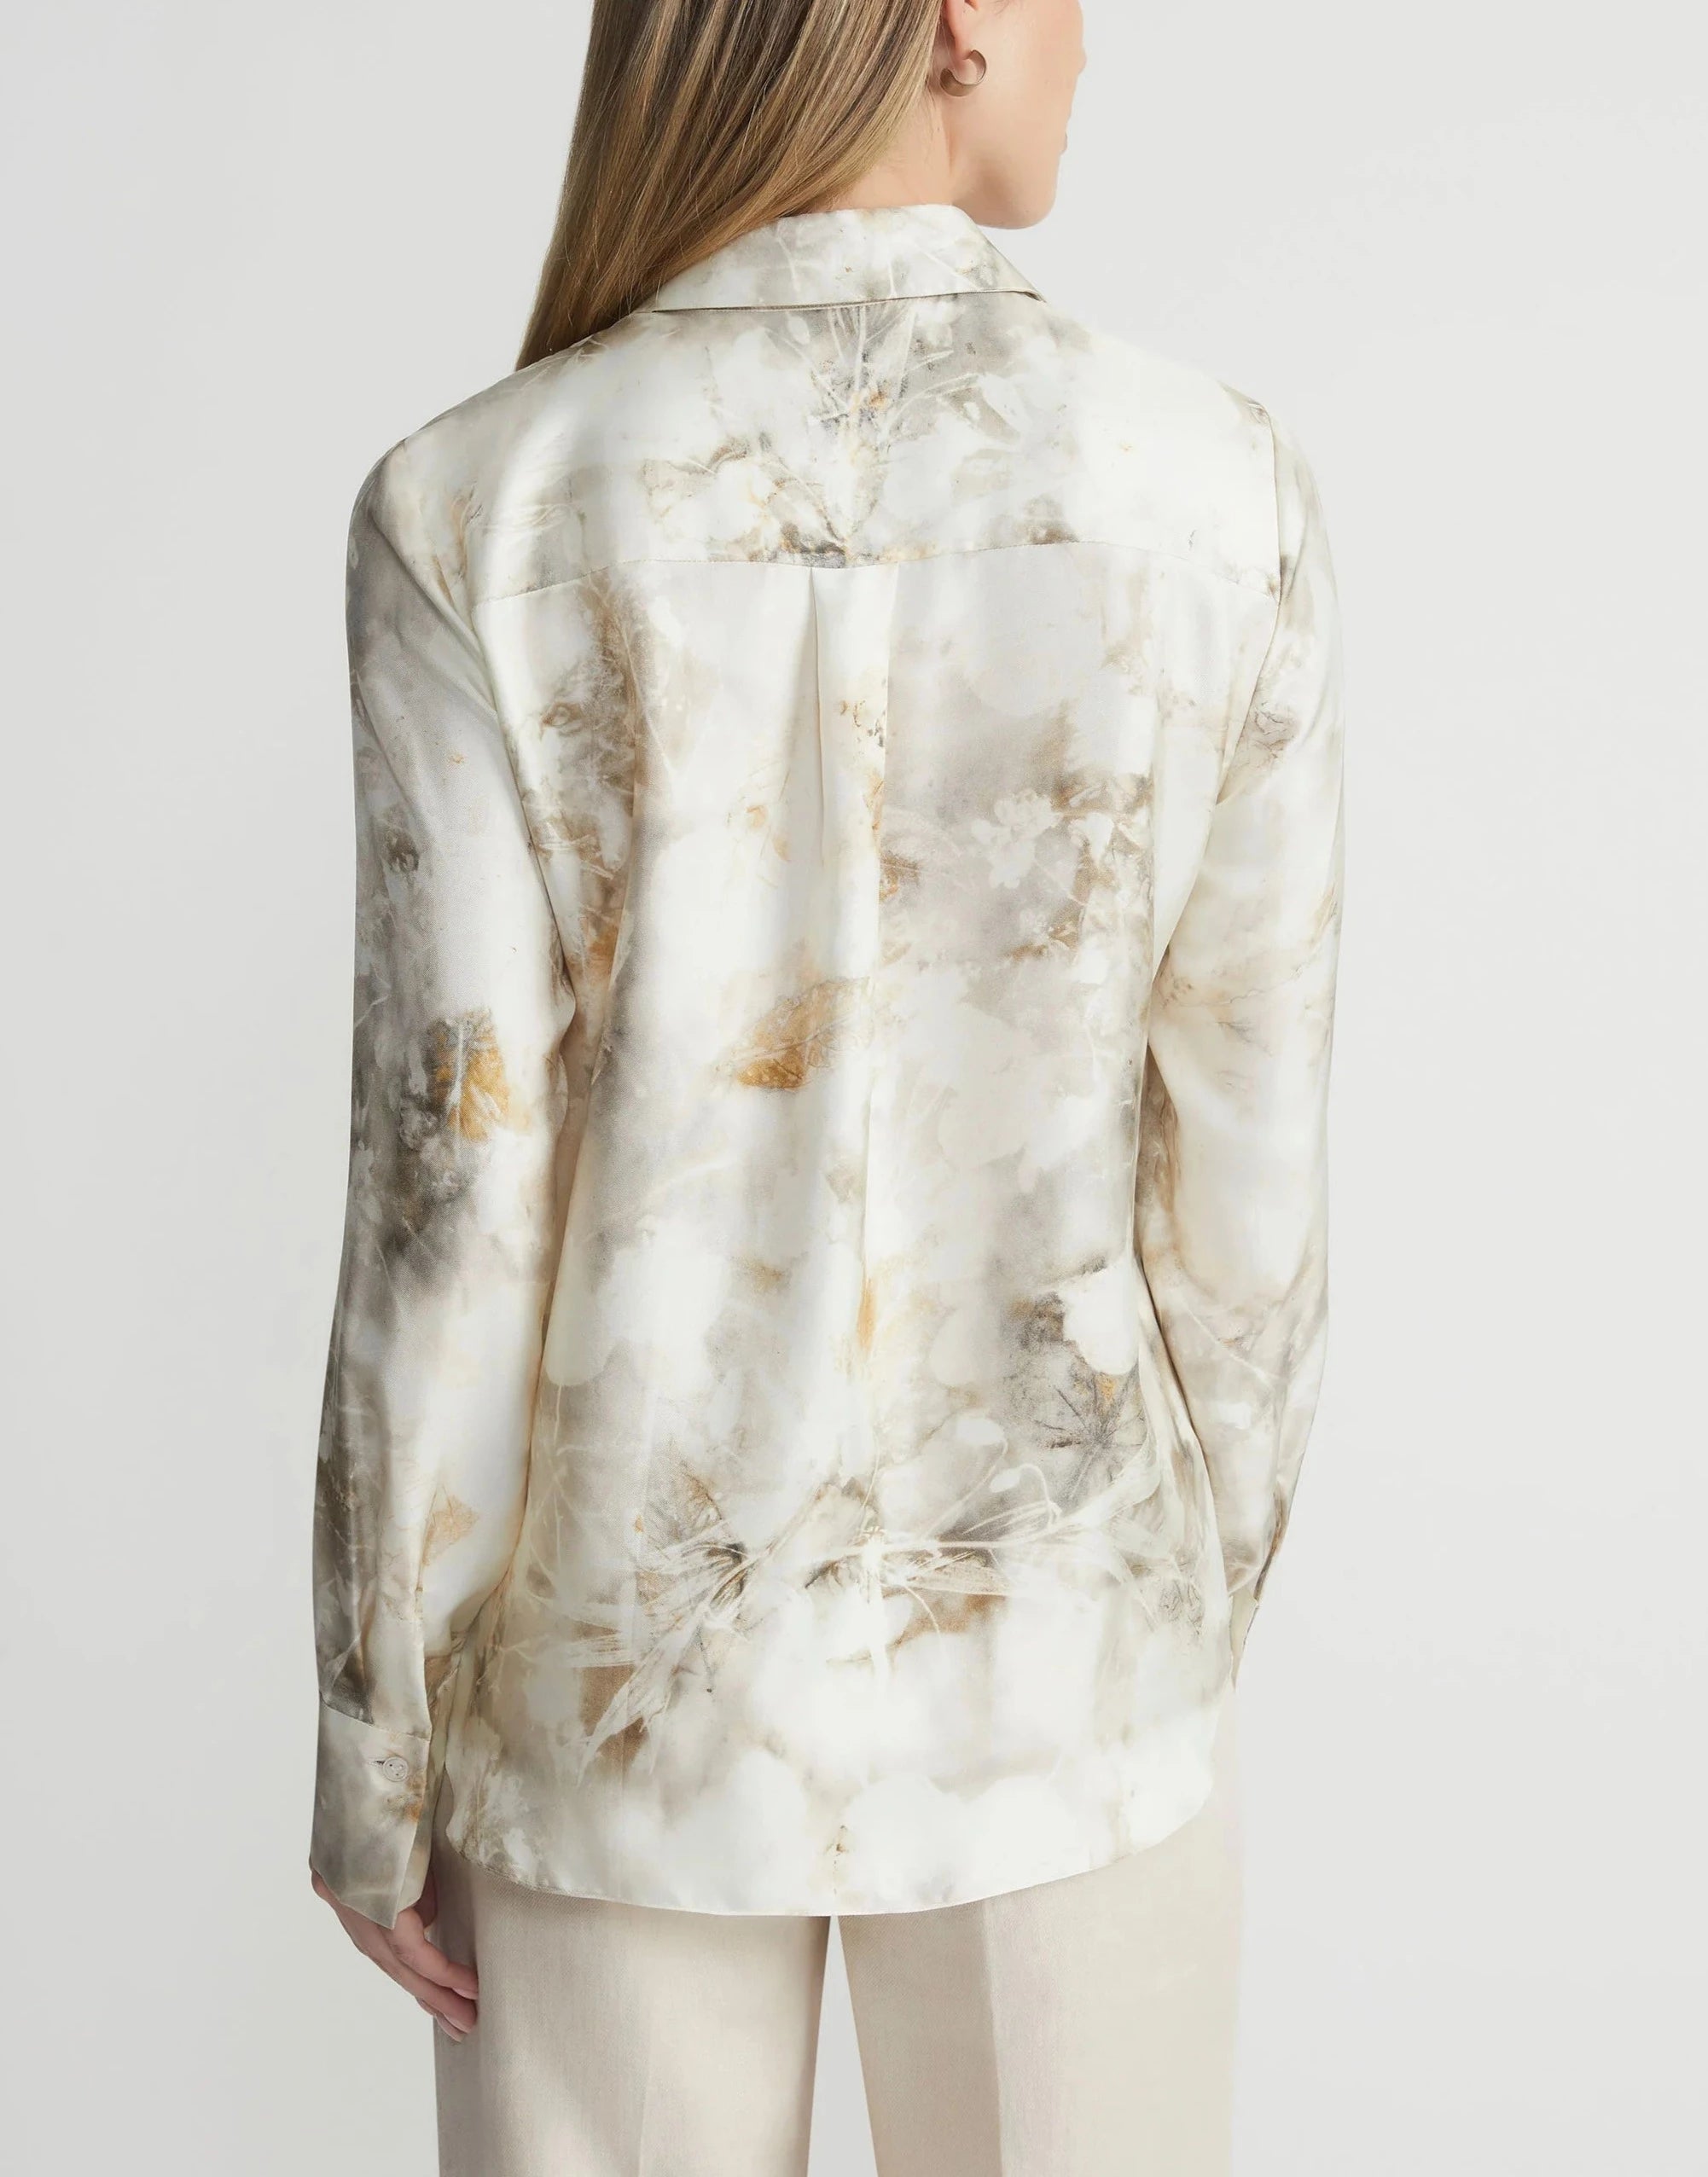 ECO LEAVES PRINT SILK TWILL BUTTONED BLOUSE